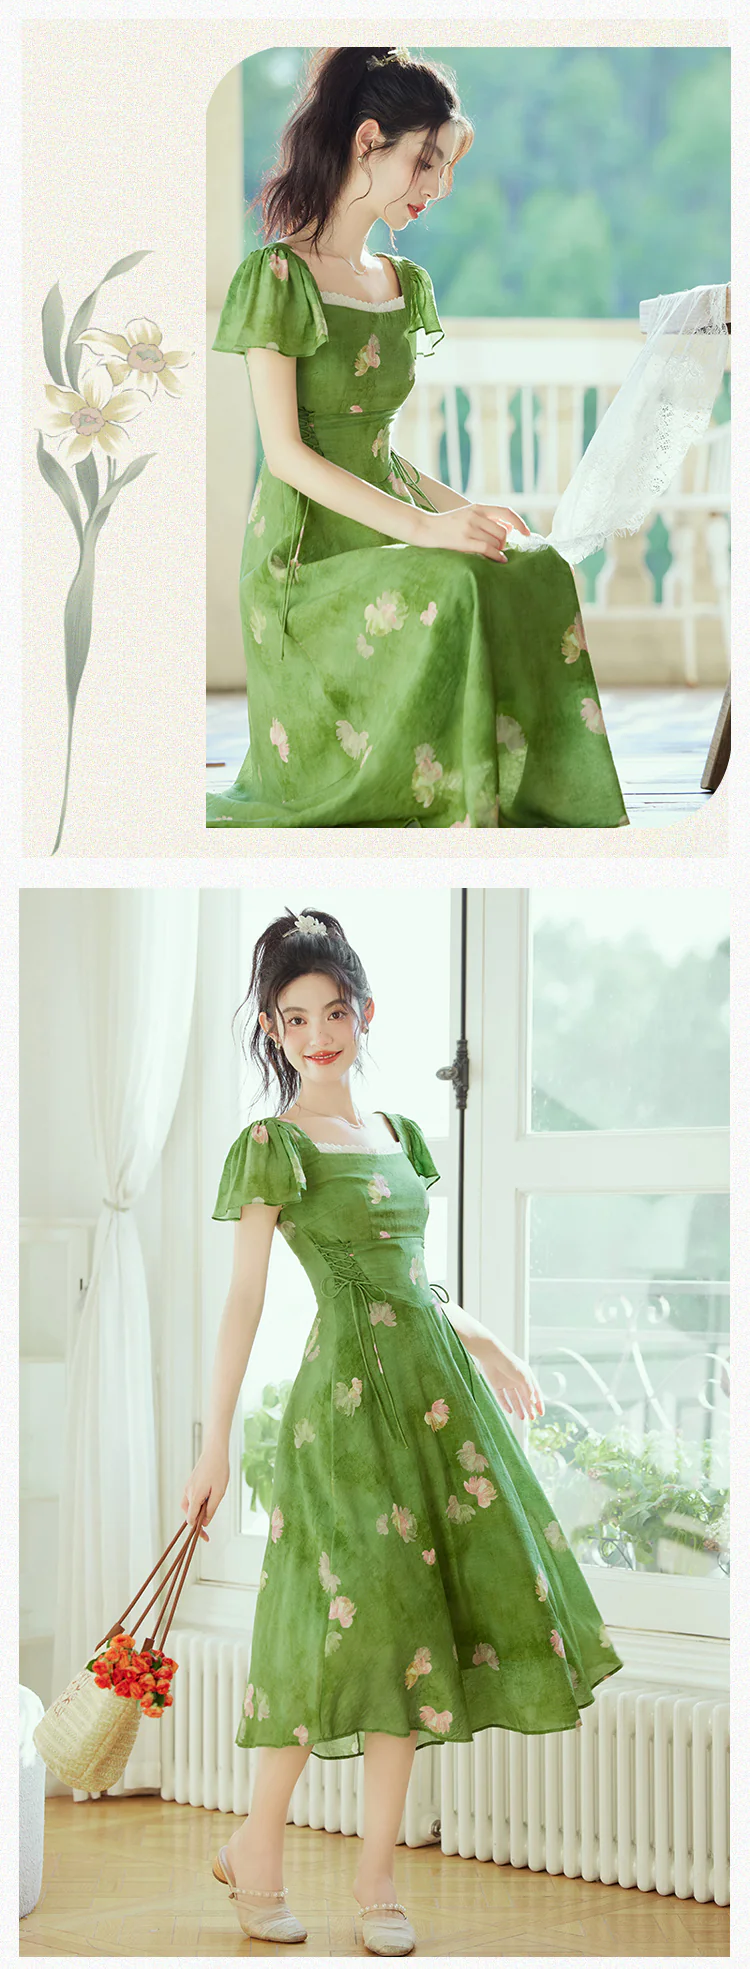 Charming-Square-Neck-Smudge-Floral-Print-Green-Summer-Beach-Dress12